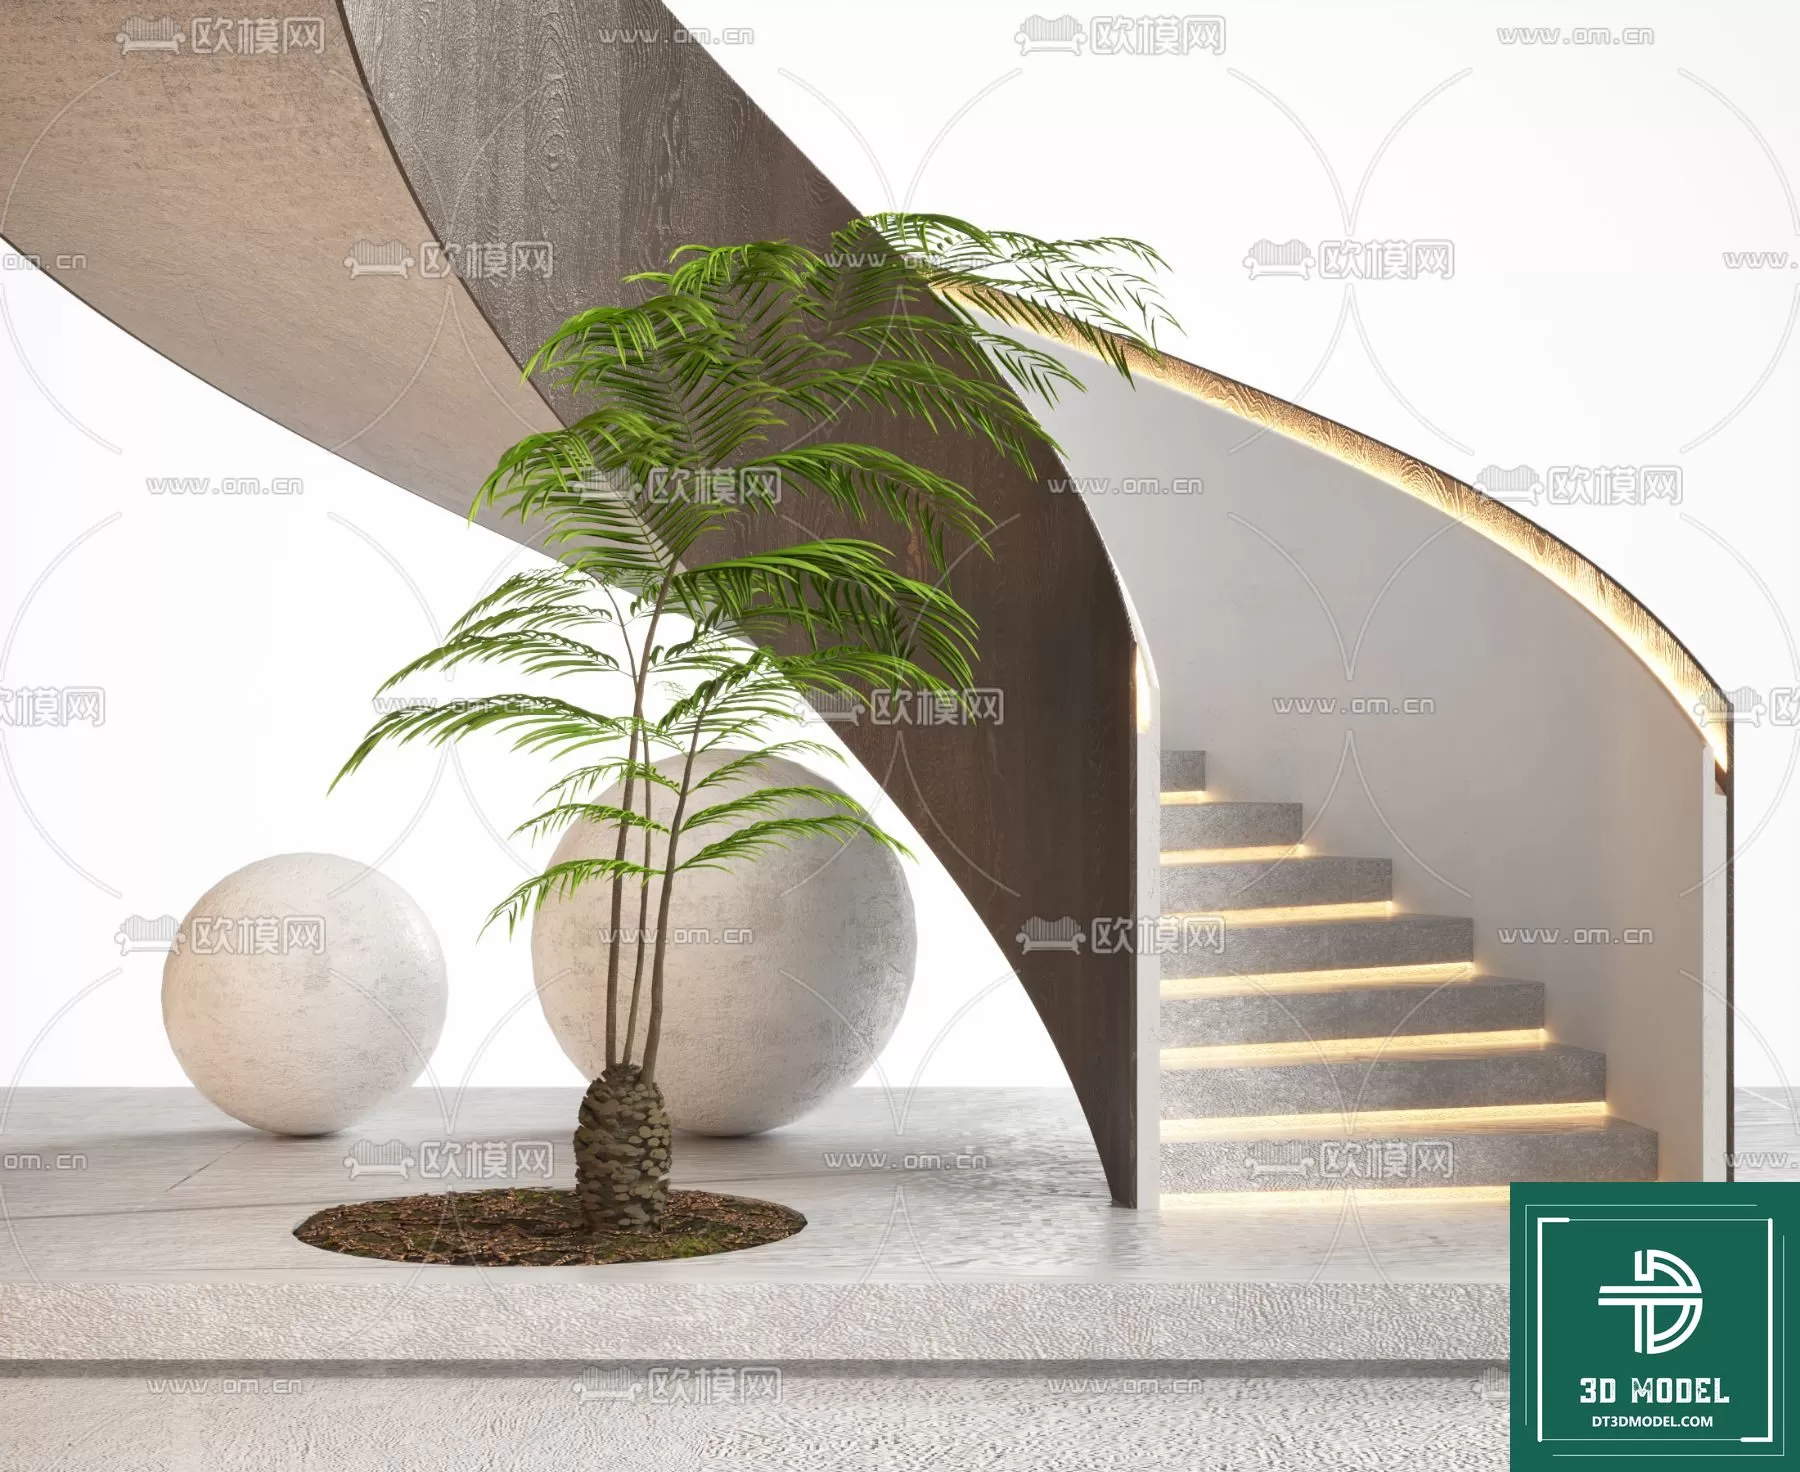 STAIR – 3DS MAX MODELS – 093 – PRO